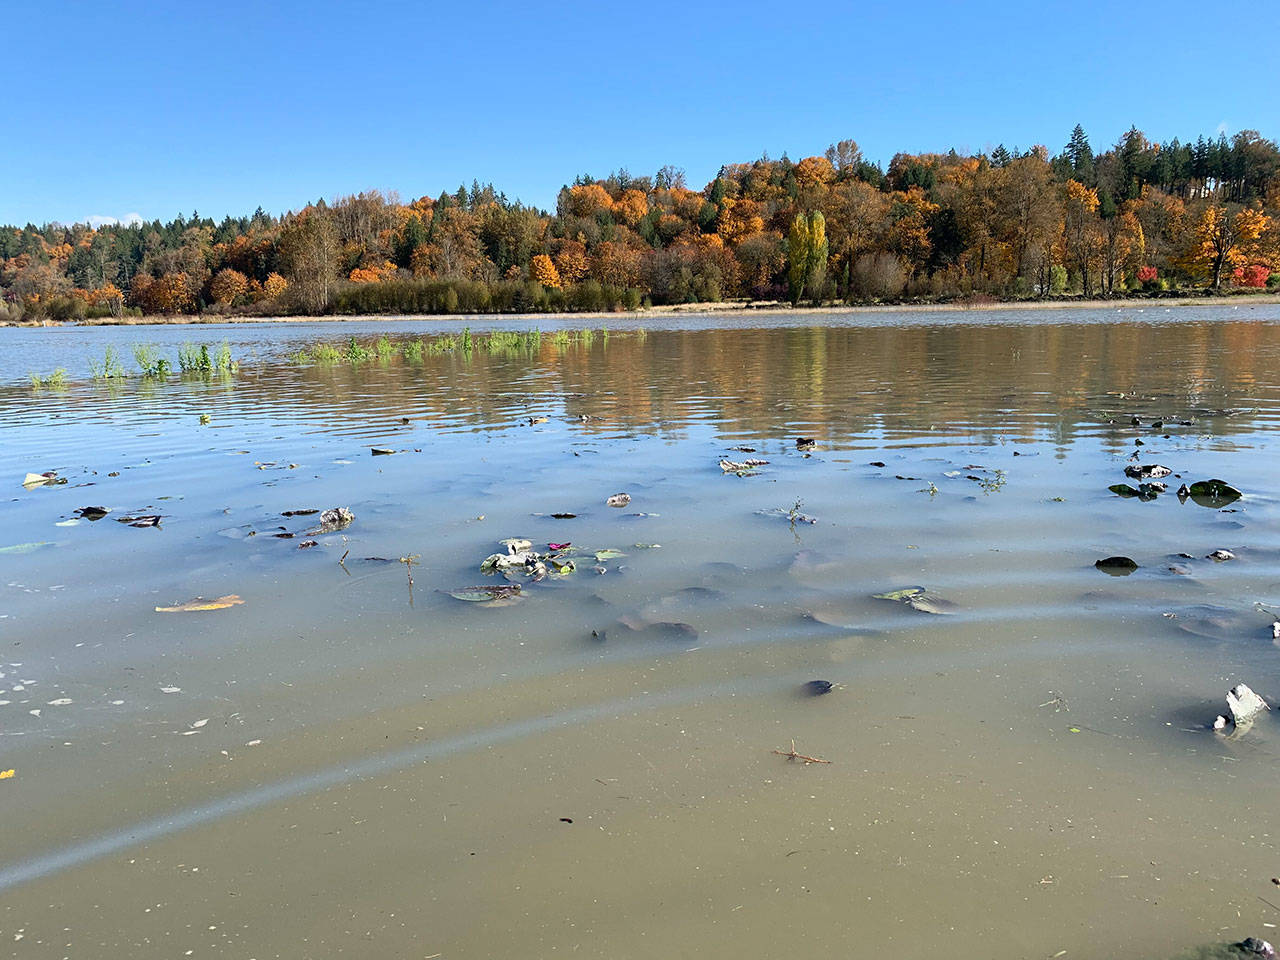 Much of Local Roots Farm near Duvall was submerged during the flooding on Oct. 22 and 23. While owner Siri Erickson-Brown said they’re prepared for flooding beginning in November, floods in October are much more rare. Contributed by Snoqualmie Valley Preservation Alliance